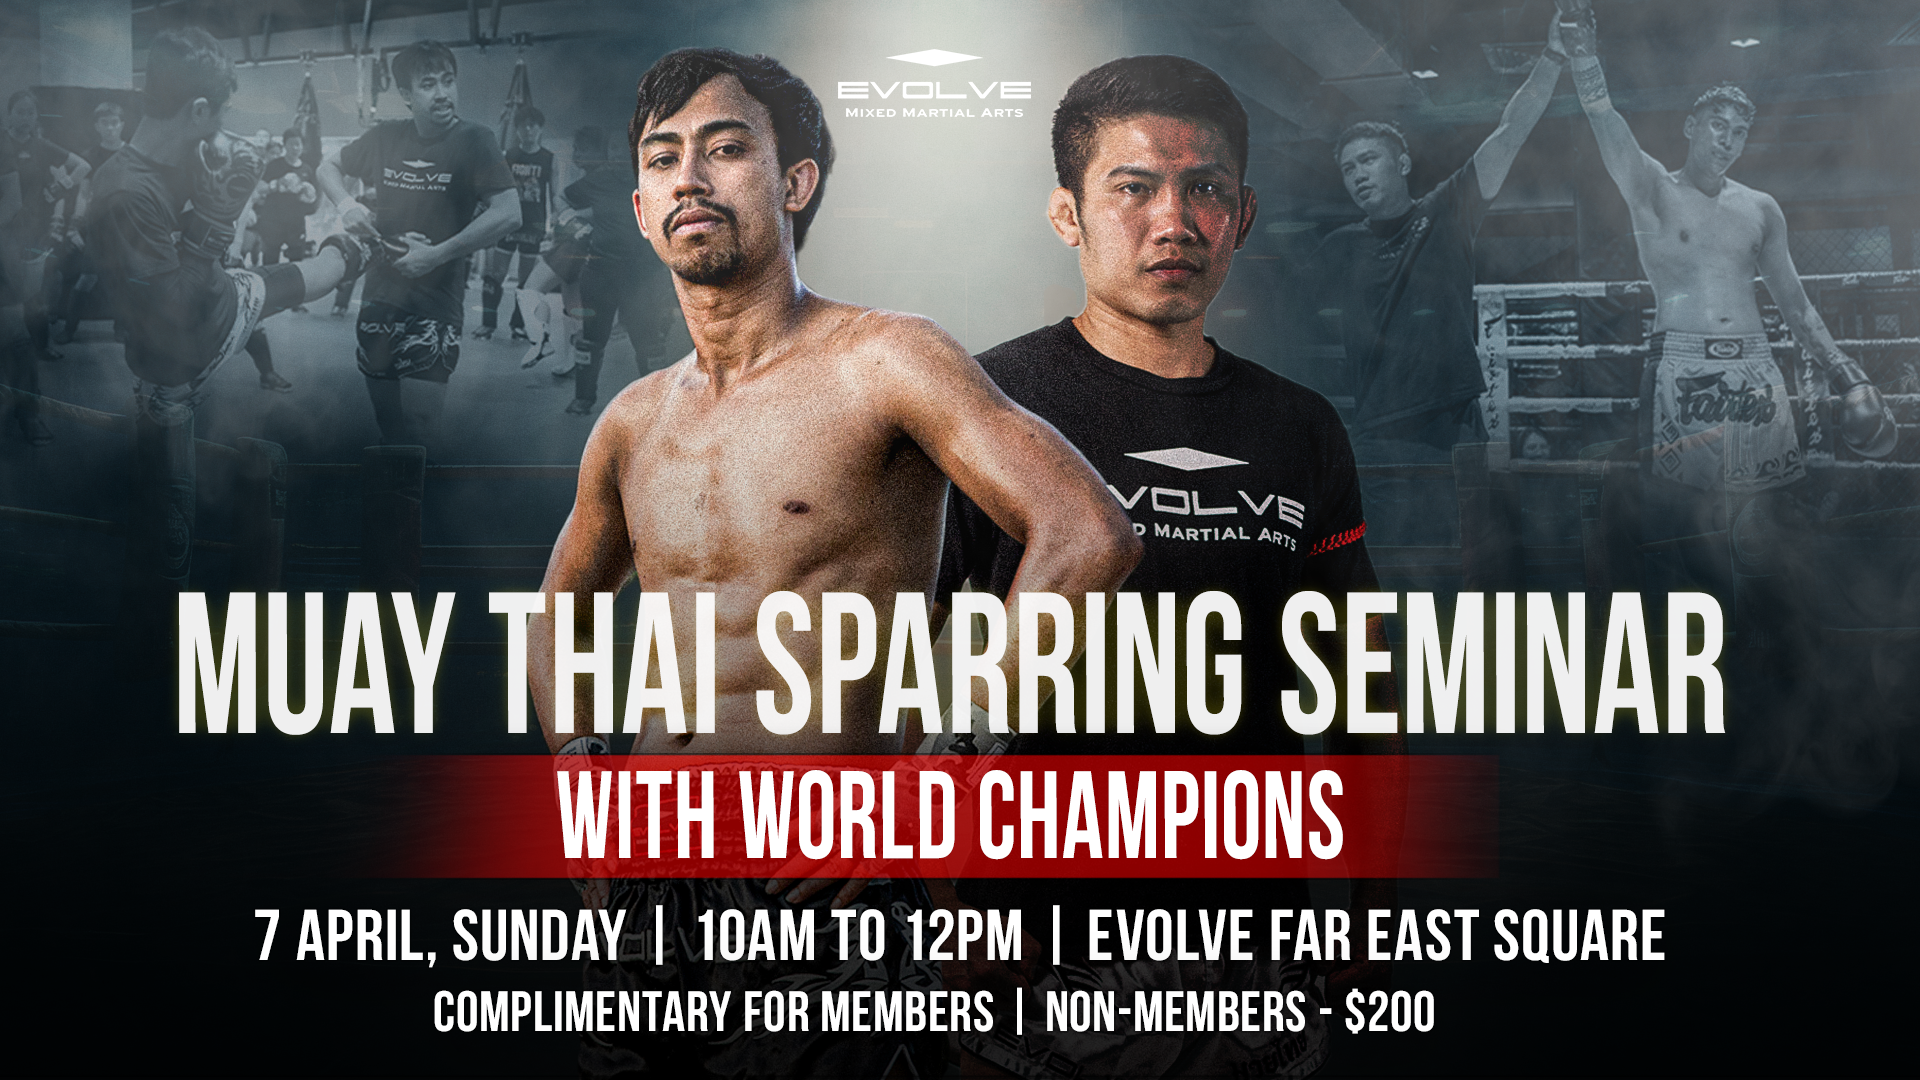 Muay Thai Sparring Seminar With World Champions